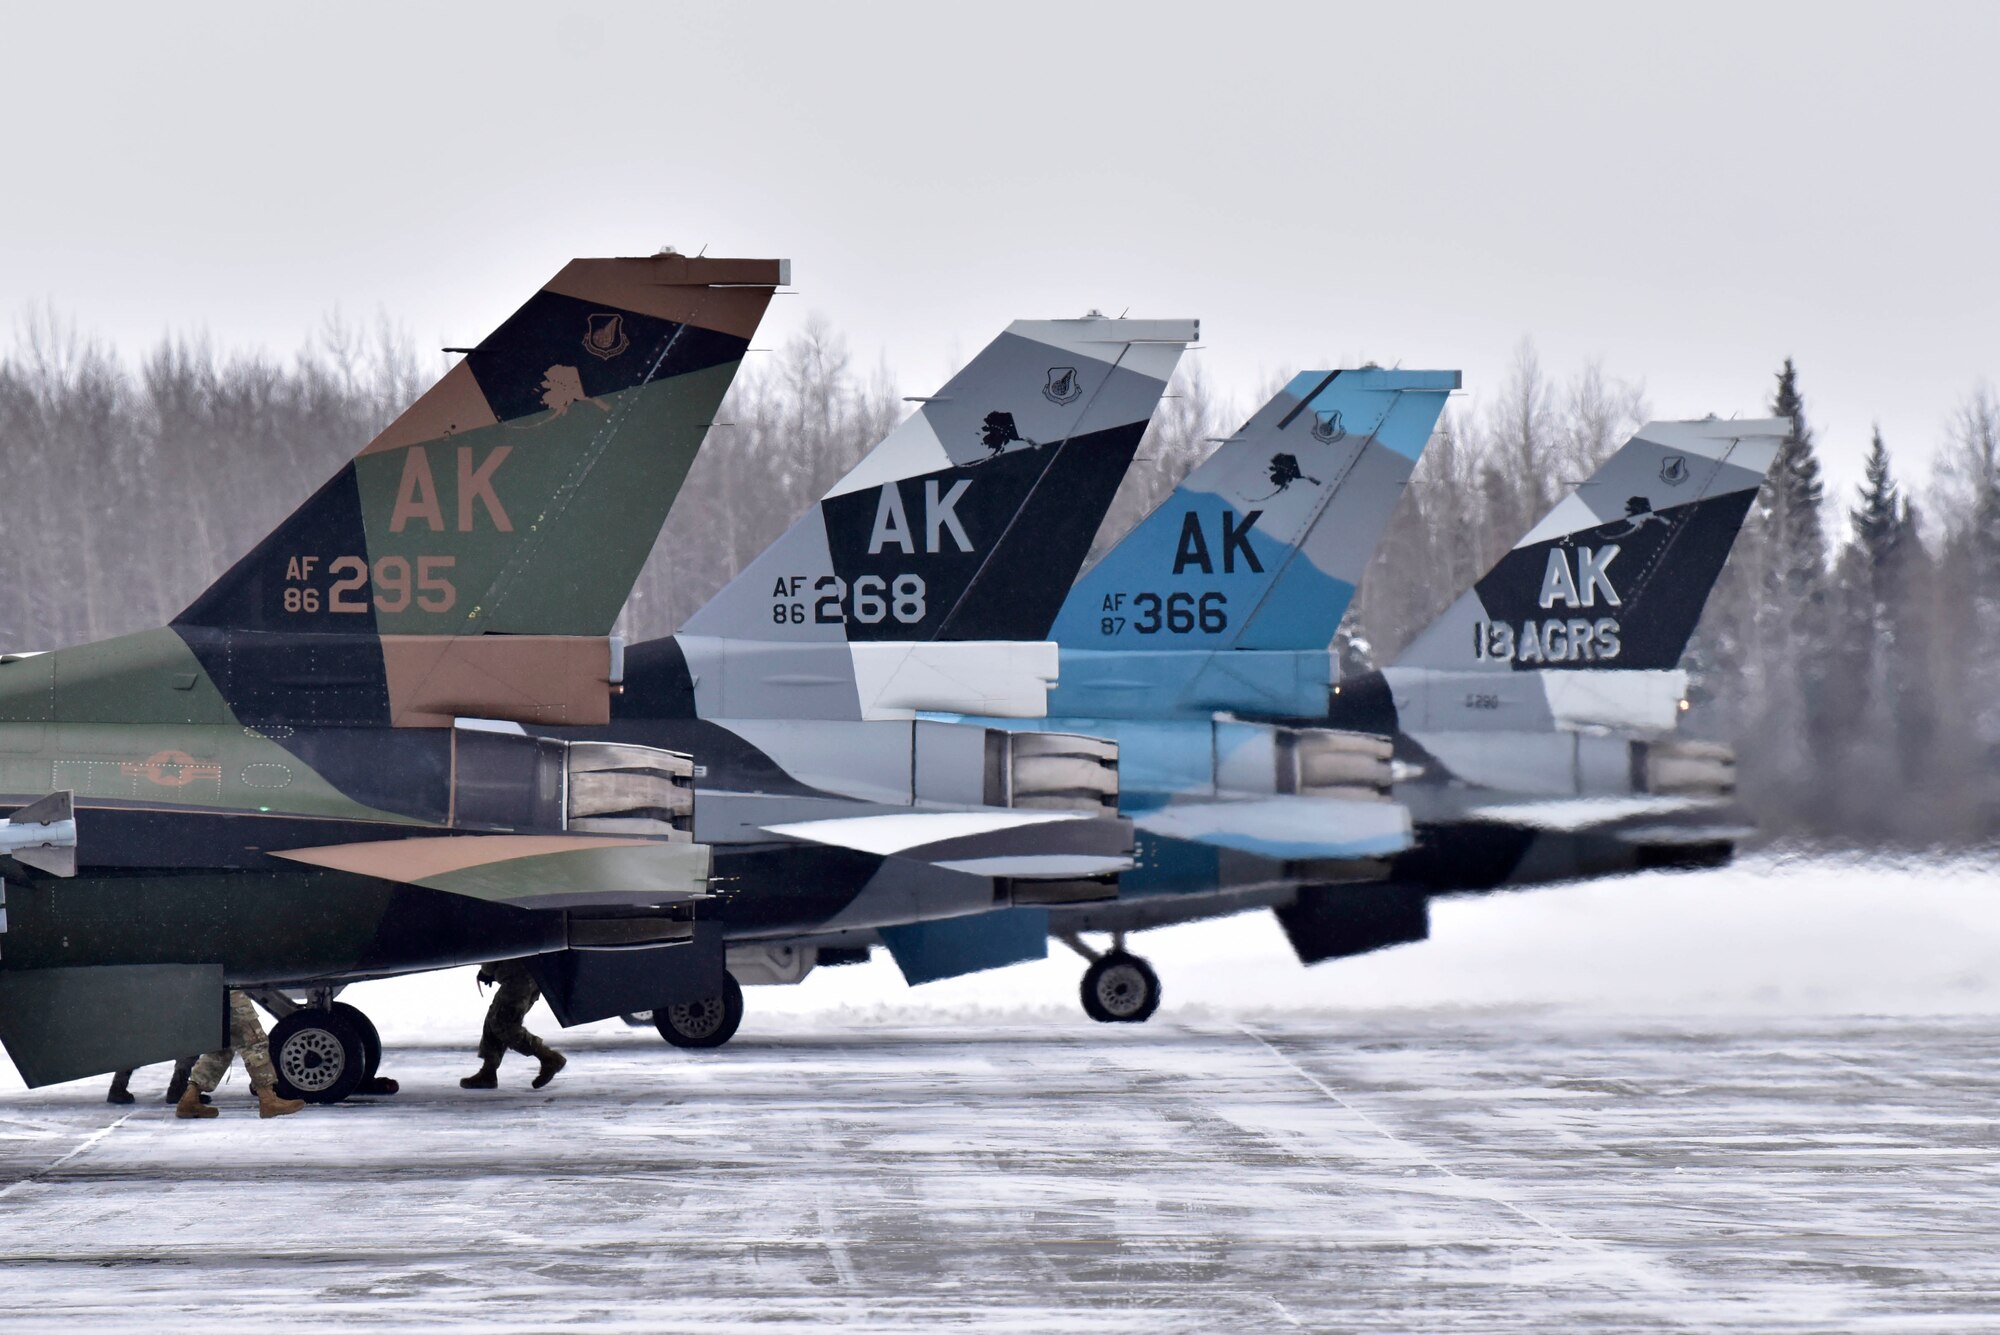 Four F-16 Fighting Falcons from the 18th Aggressor Squadron sit on the runway for final maintenance checks prior to taking off from Eielson Air Force Base, Alaska, March 24, 2020. Maintainers work around the clock to ensure the 354th Fighter Wing’s jets are always ready to execute the mission. (U.S. Air Force photo by Senior Airman Beaux Hebert)